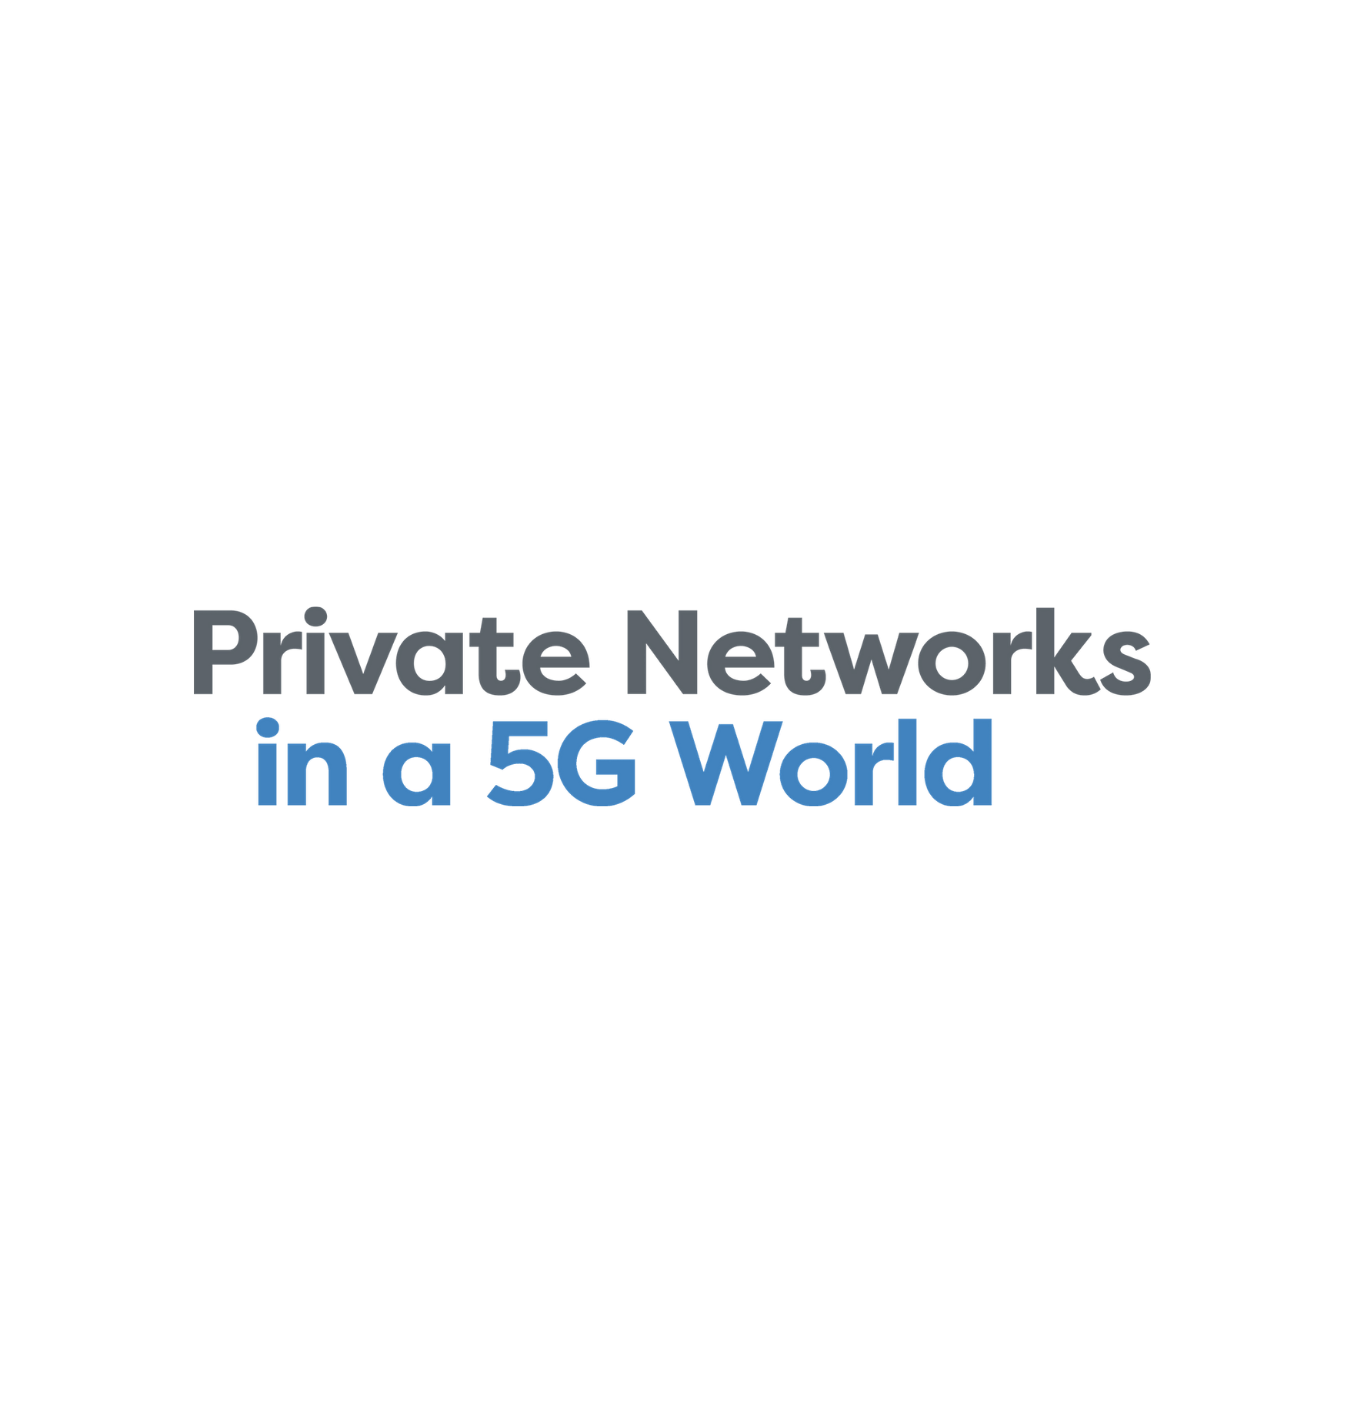 private networks in a 5g world